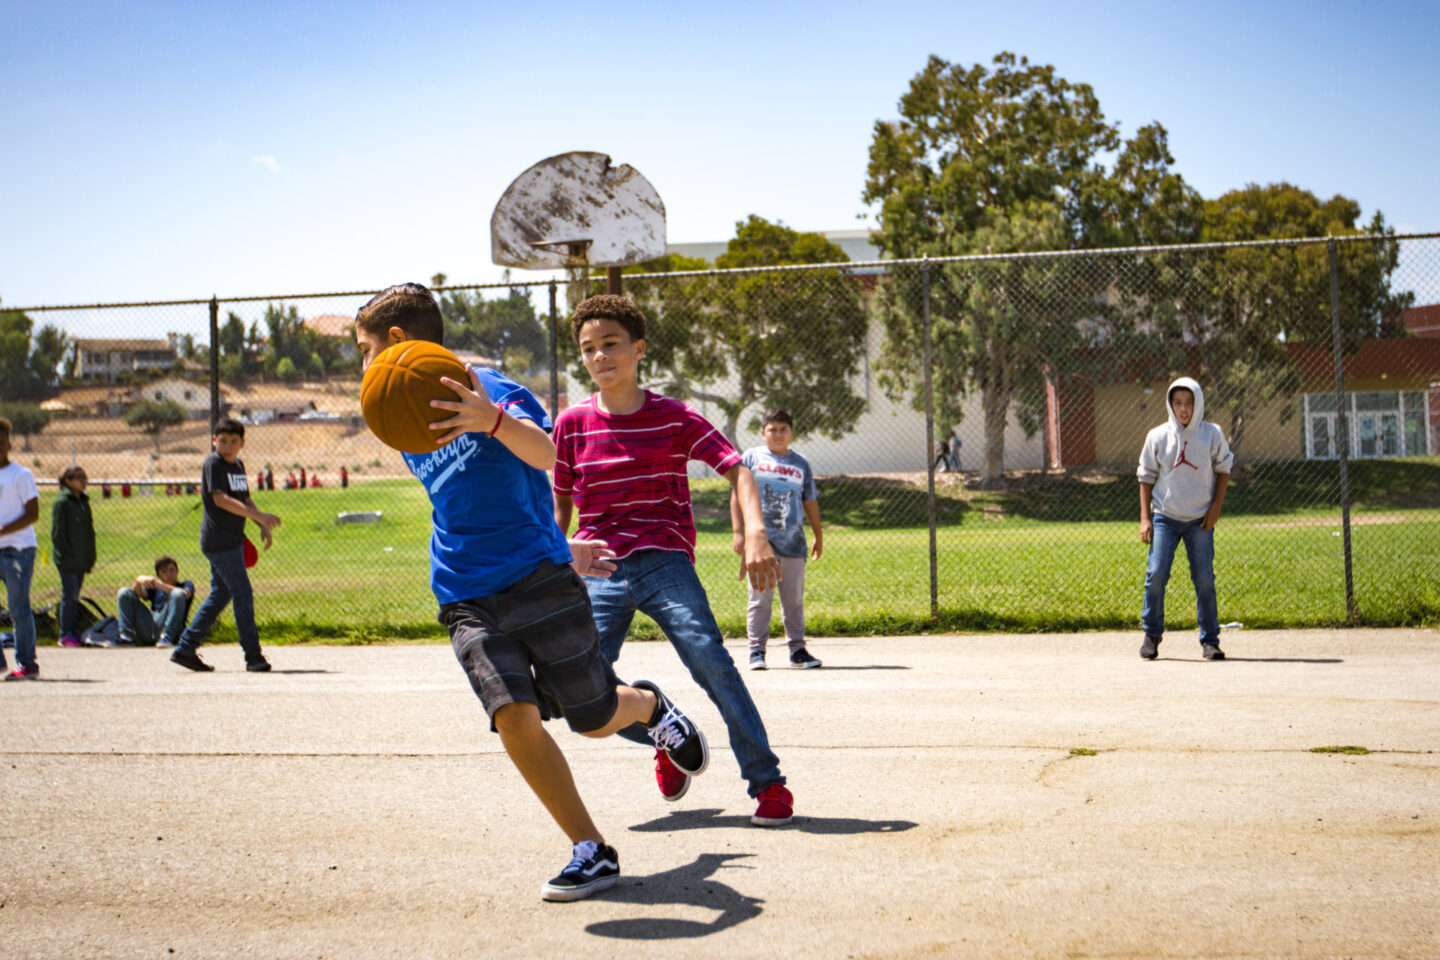 Students playing basketball at a school in California